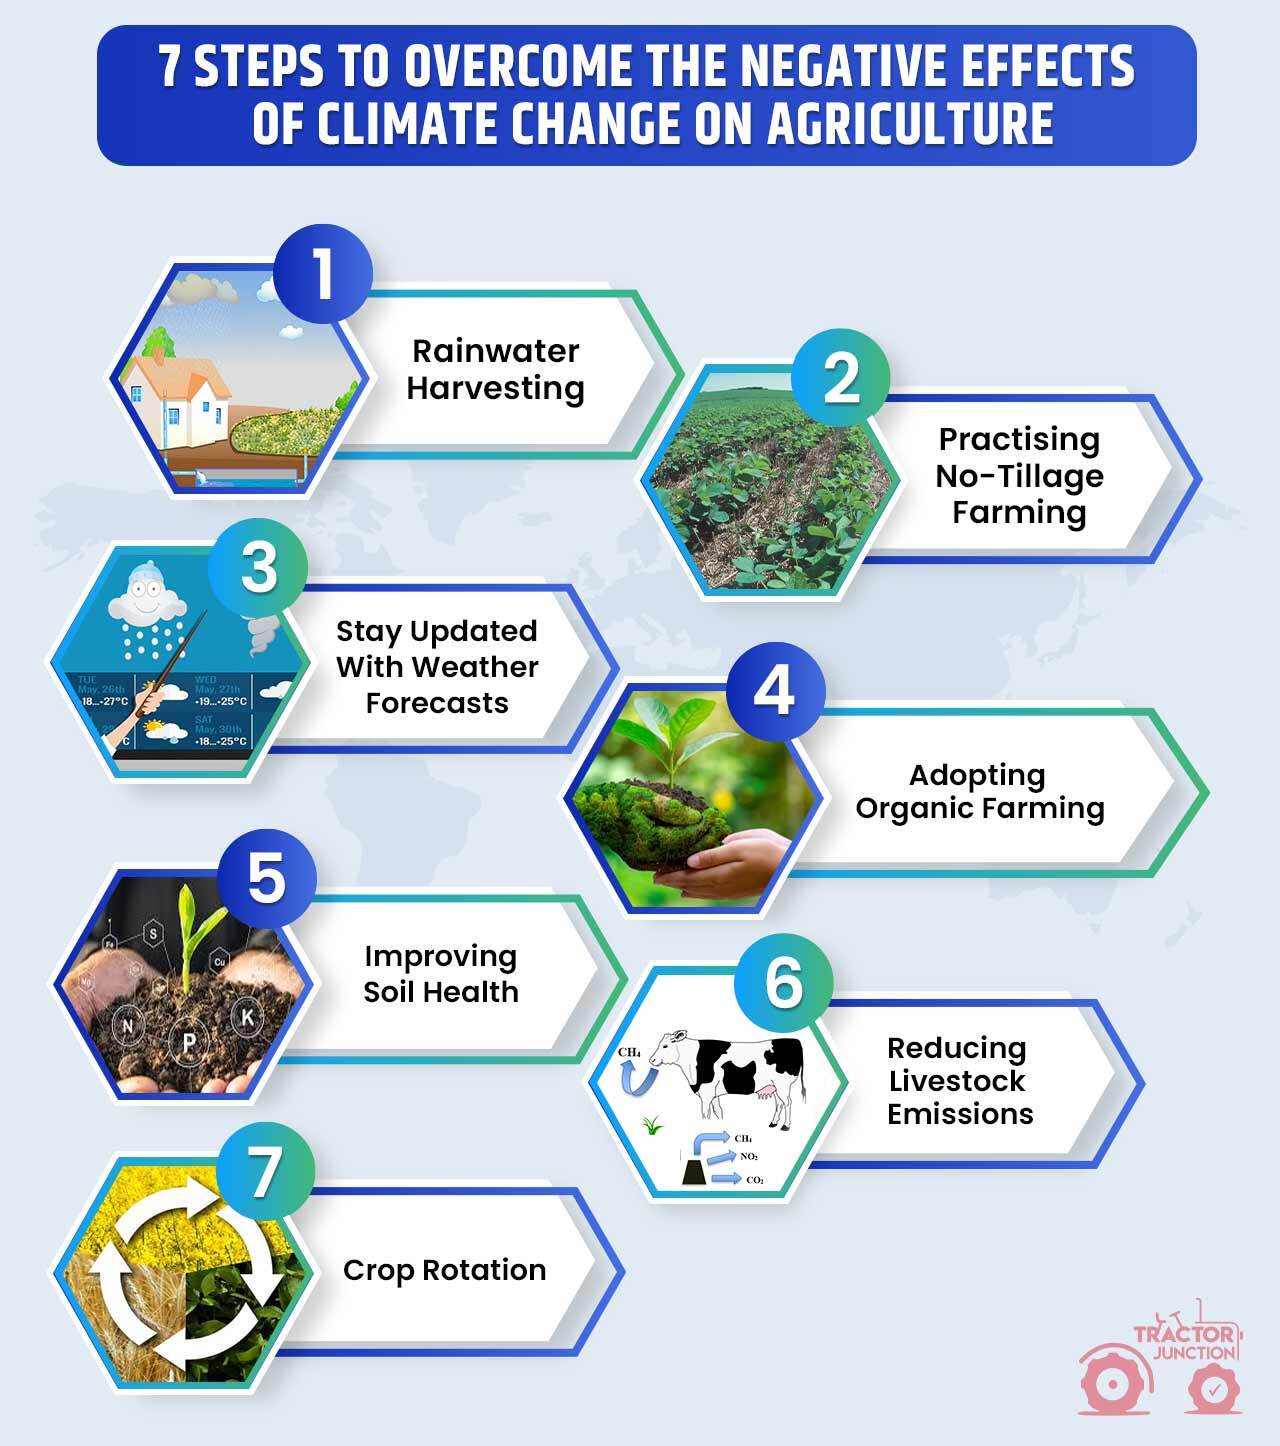 Negative Effects of Climate Change on Agriculture - 7 Ways to Stay Prepared